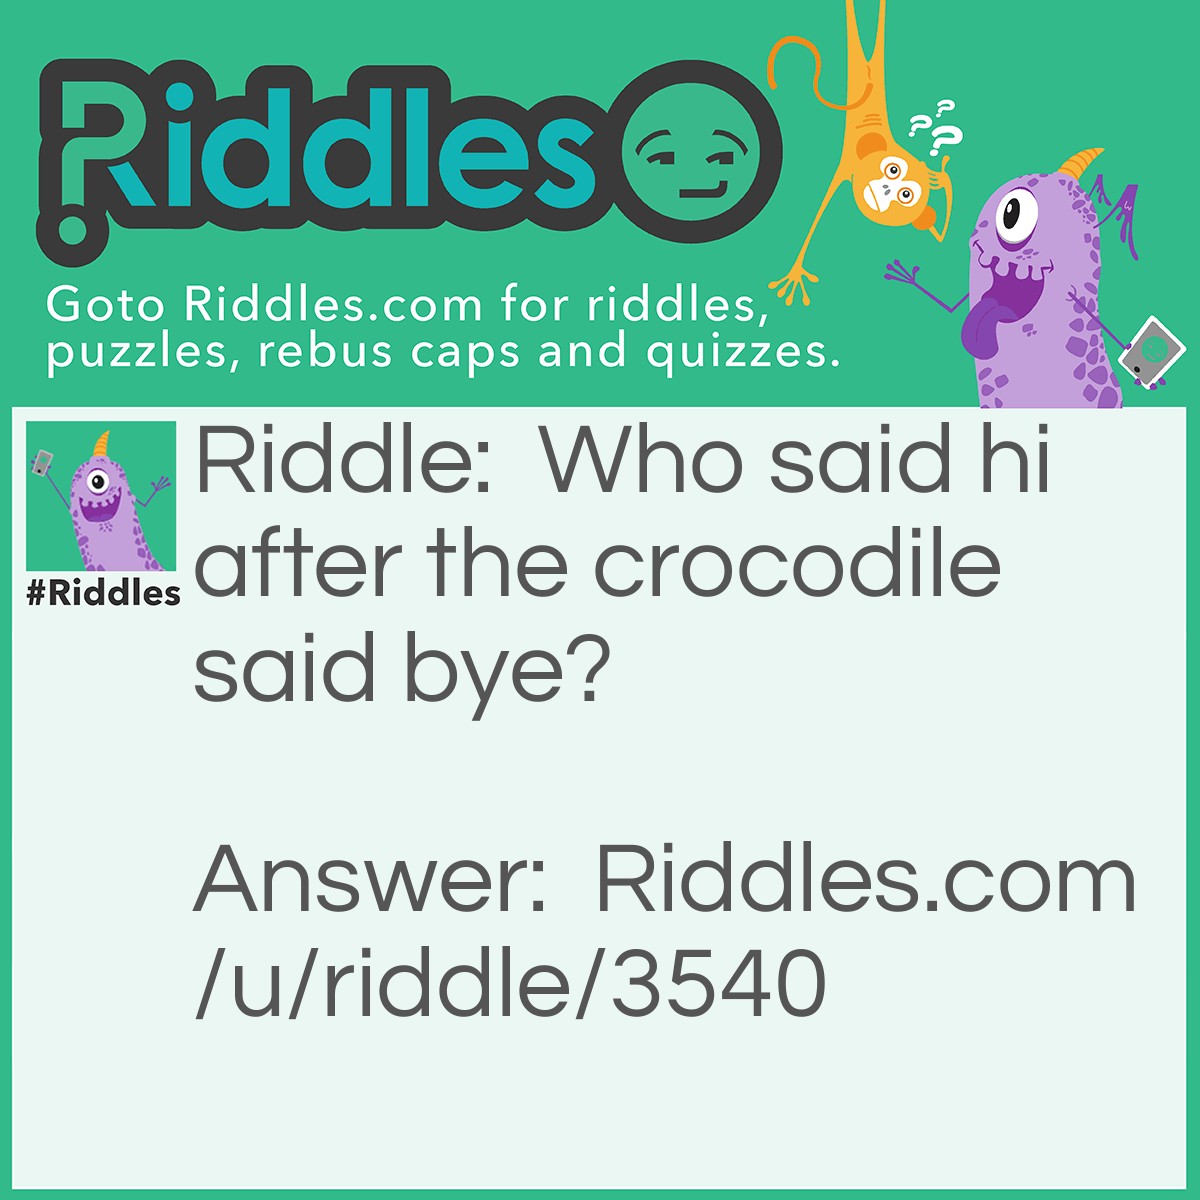 Riddle: Who said hi after the crocodile said bye? Answer: The alligator.